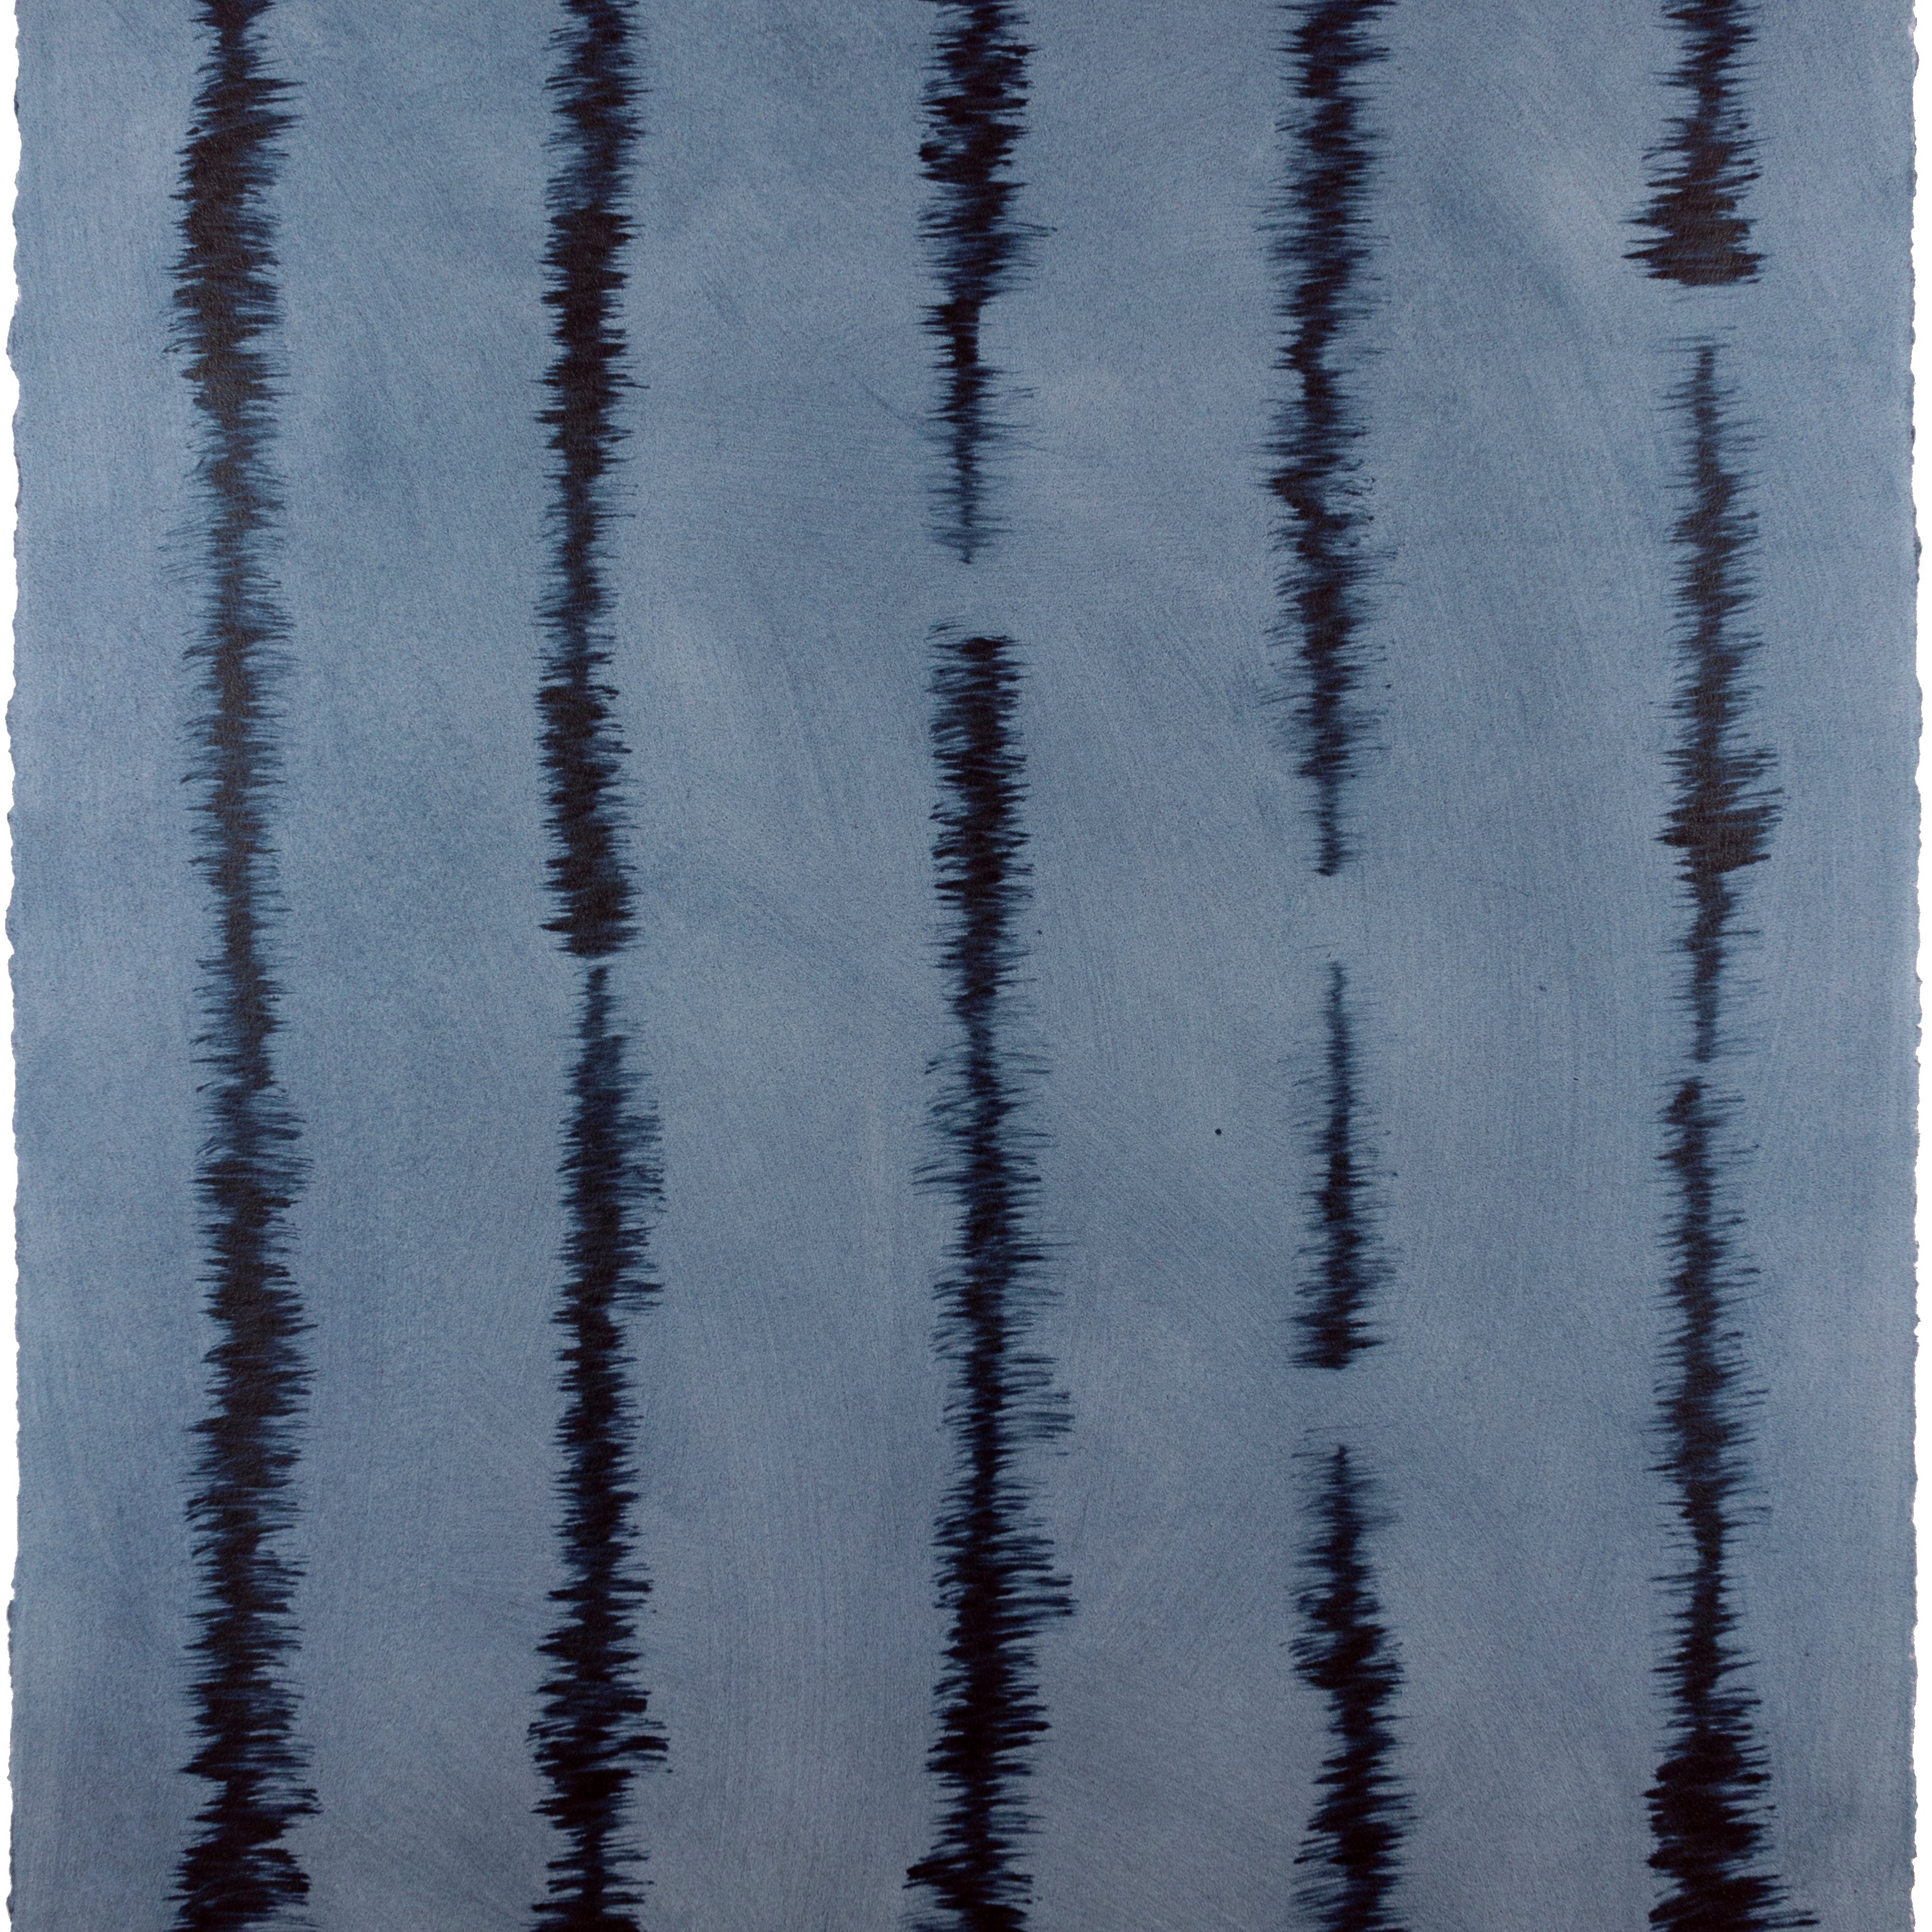 Sheet of hand-painted wallpaper with an irregular vibrating linear pattern in navy on a blue field.